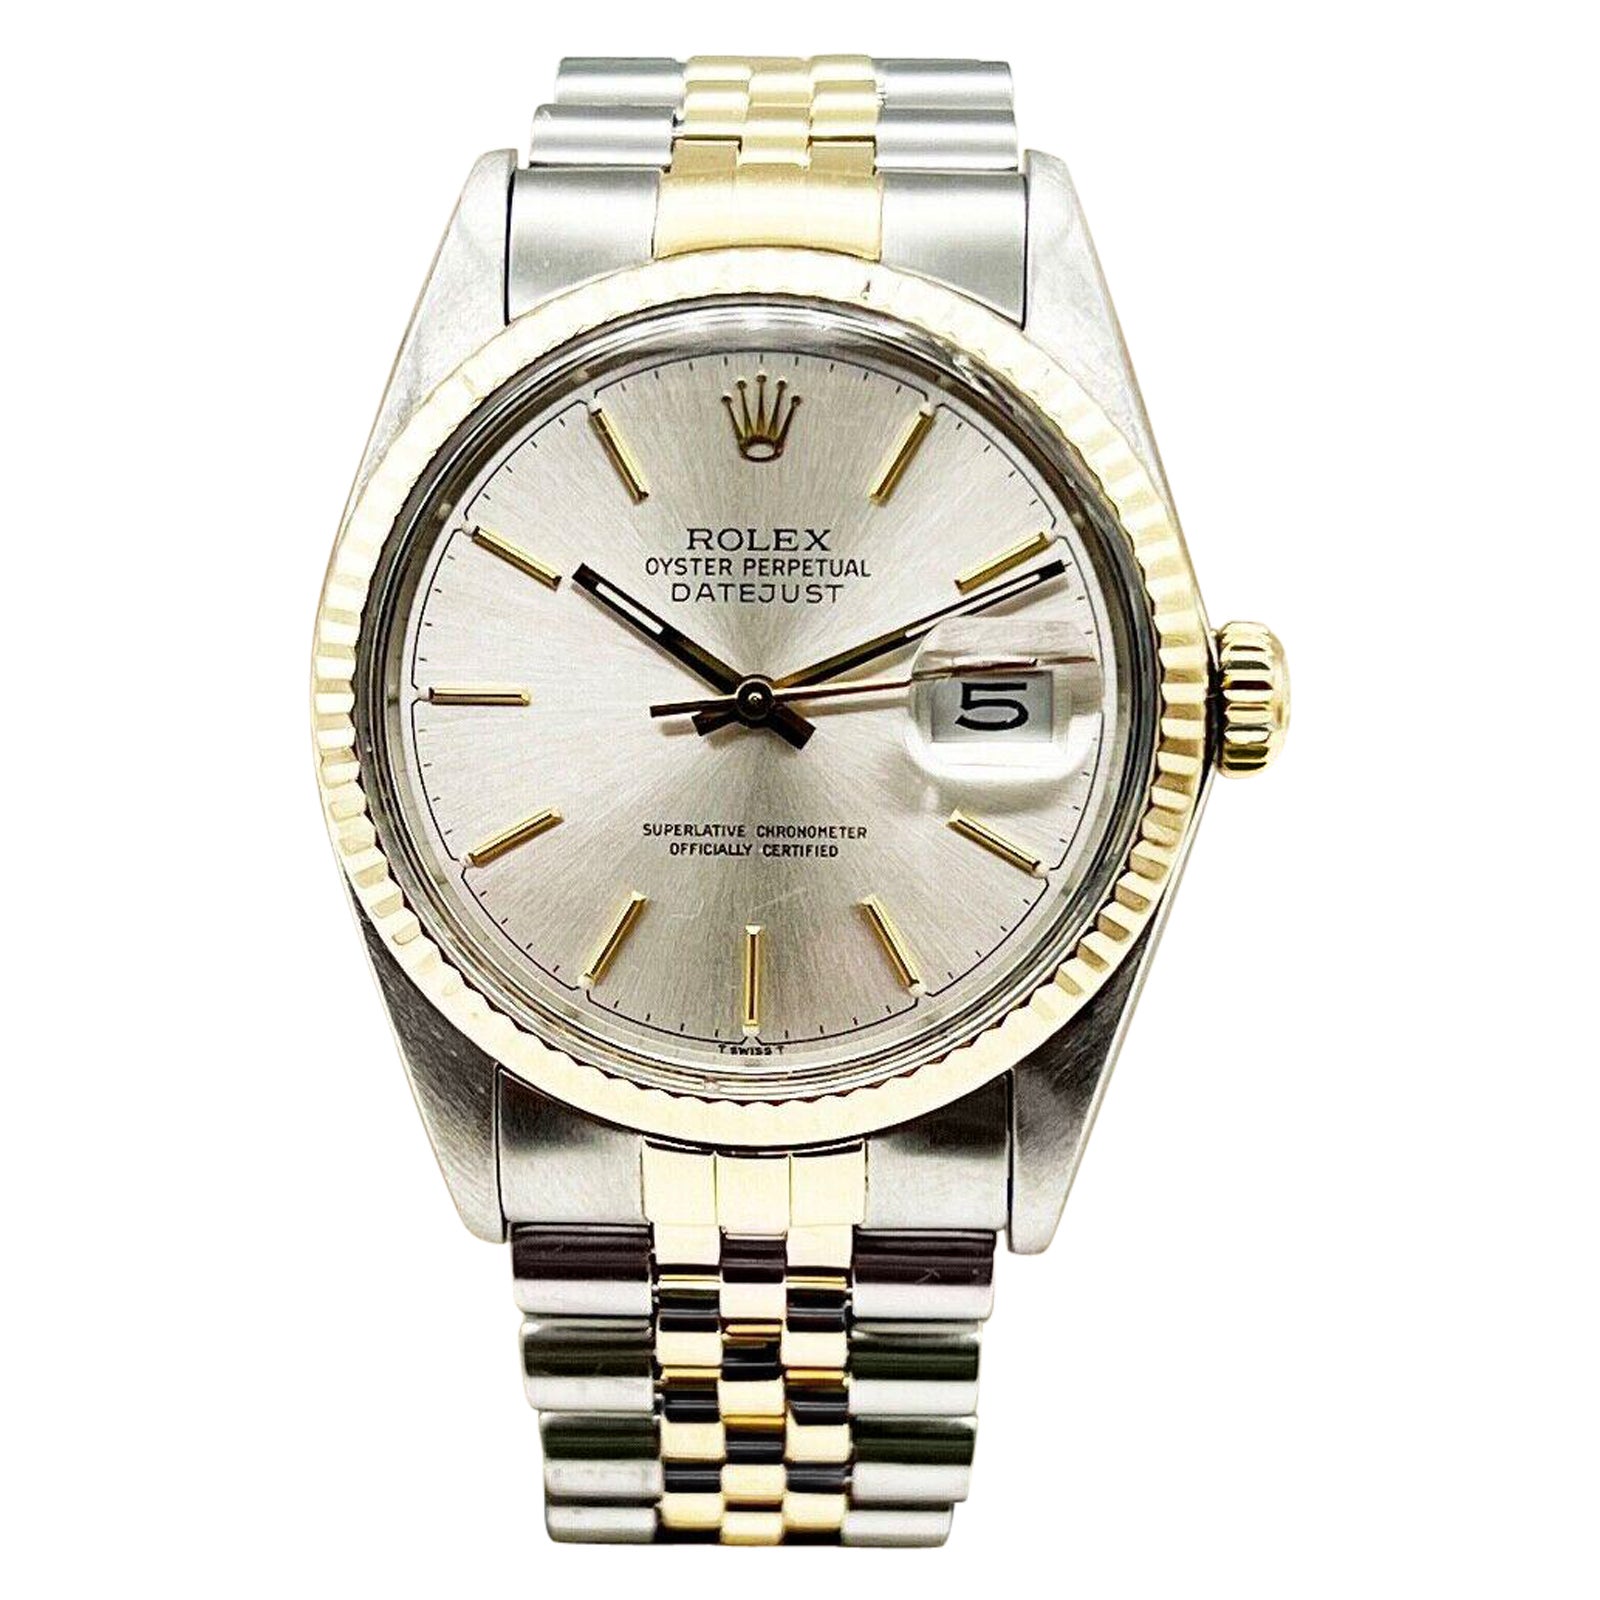 Rolex Datejust 16013 Silver Dial 18K Yellow Gold Stainless Steel For Sale